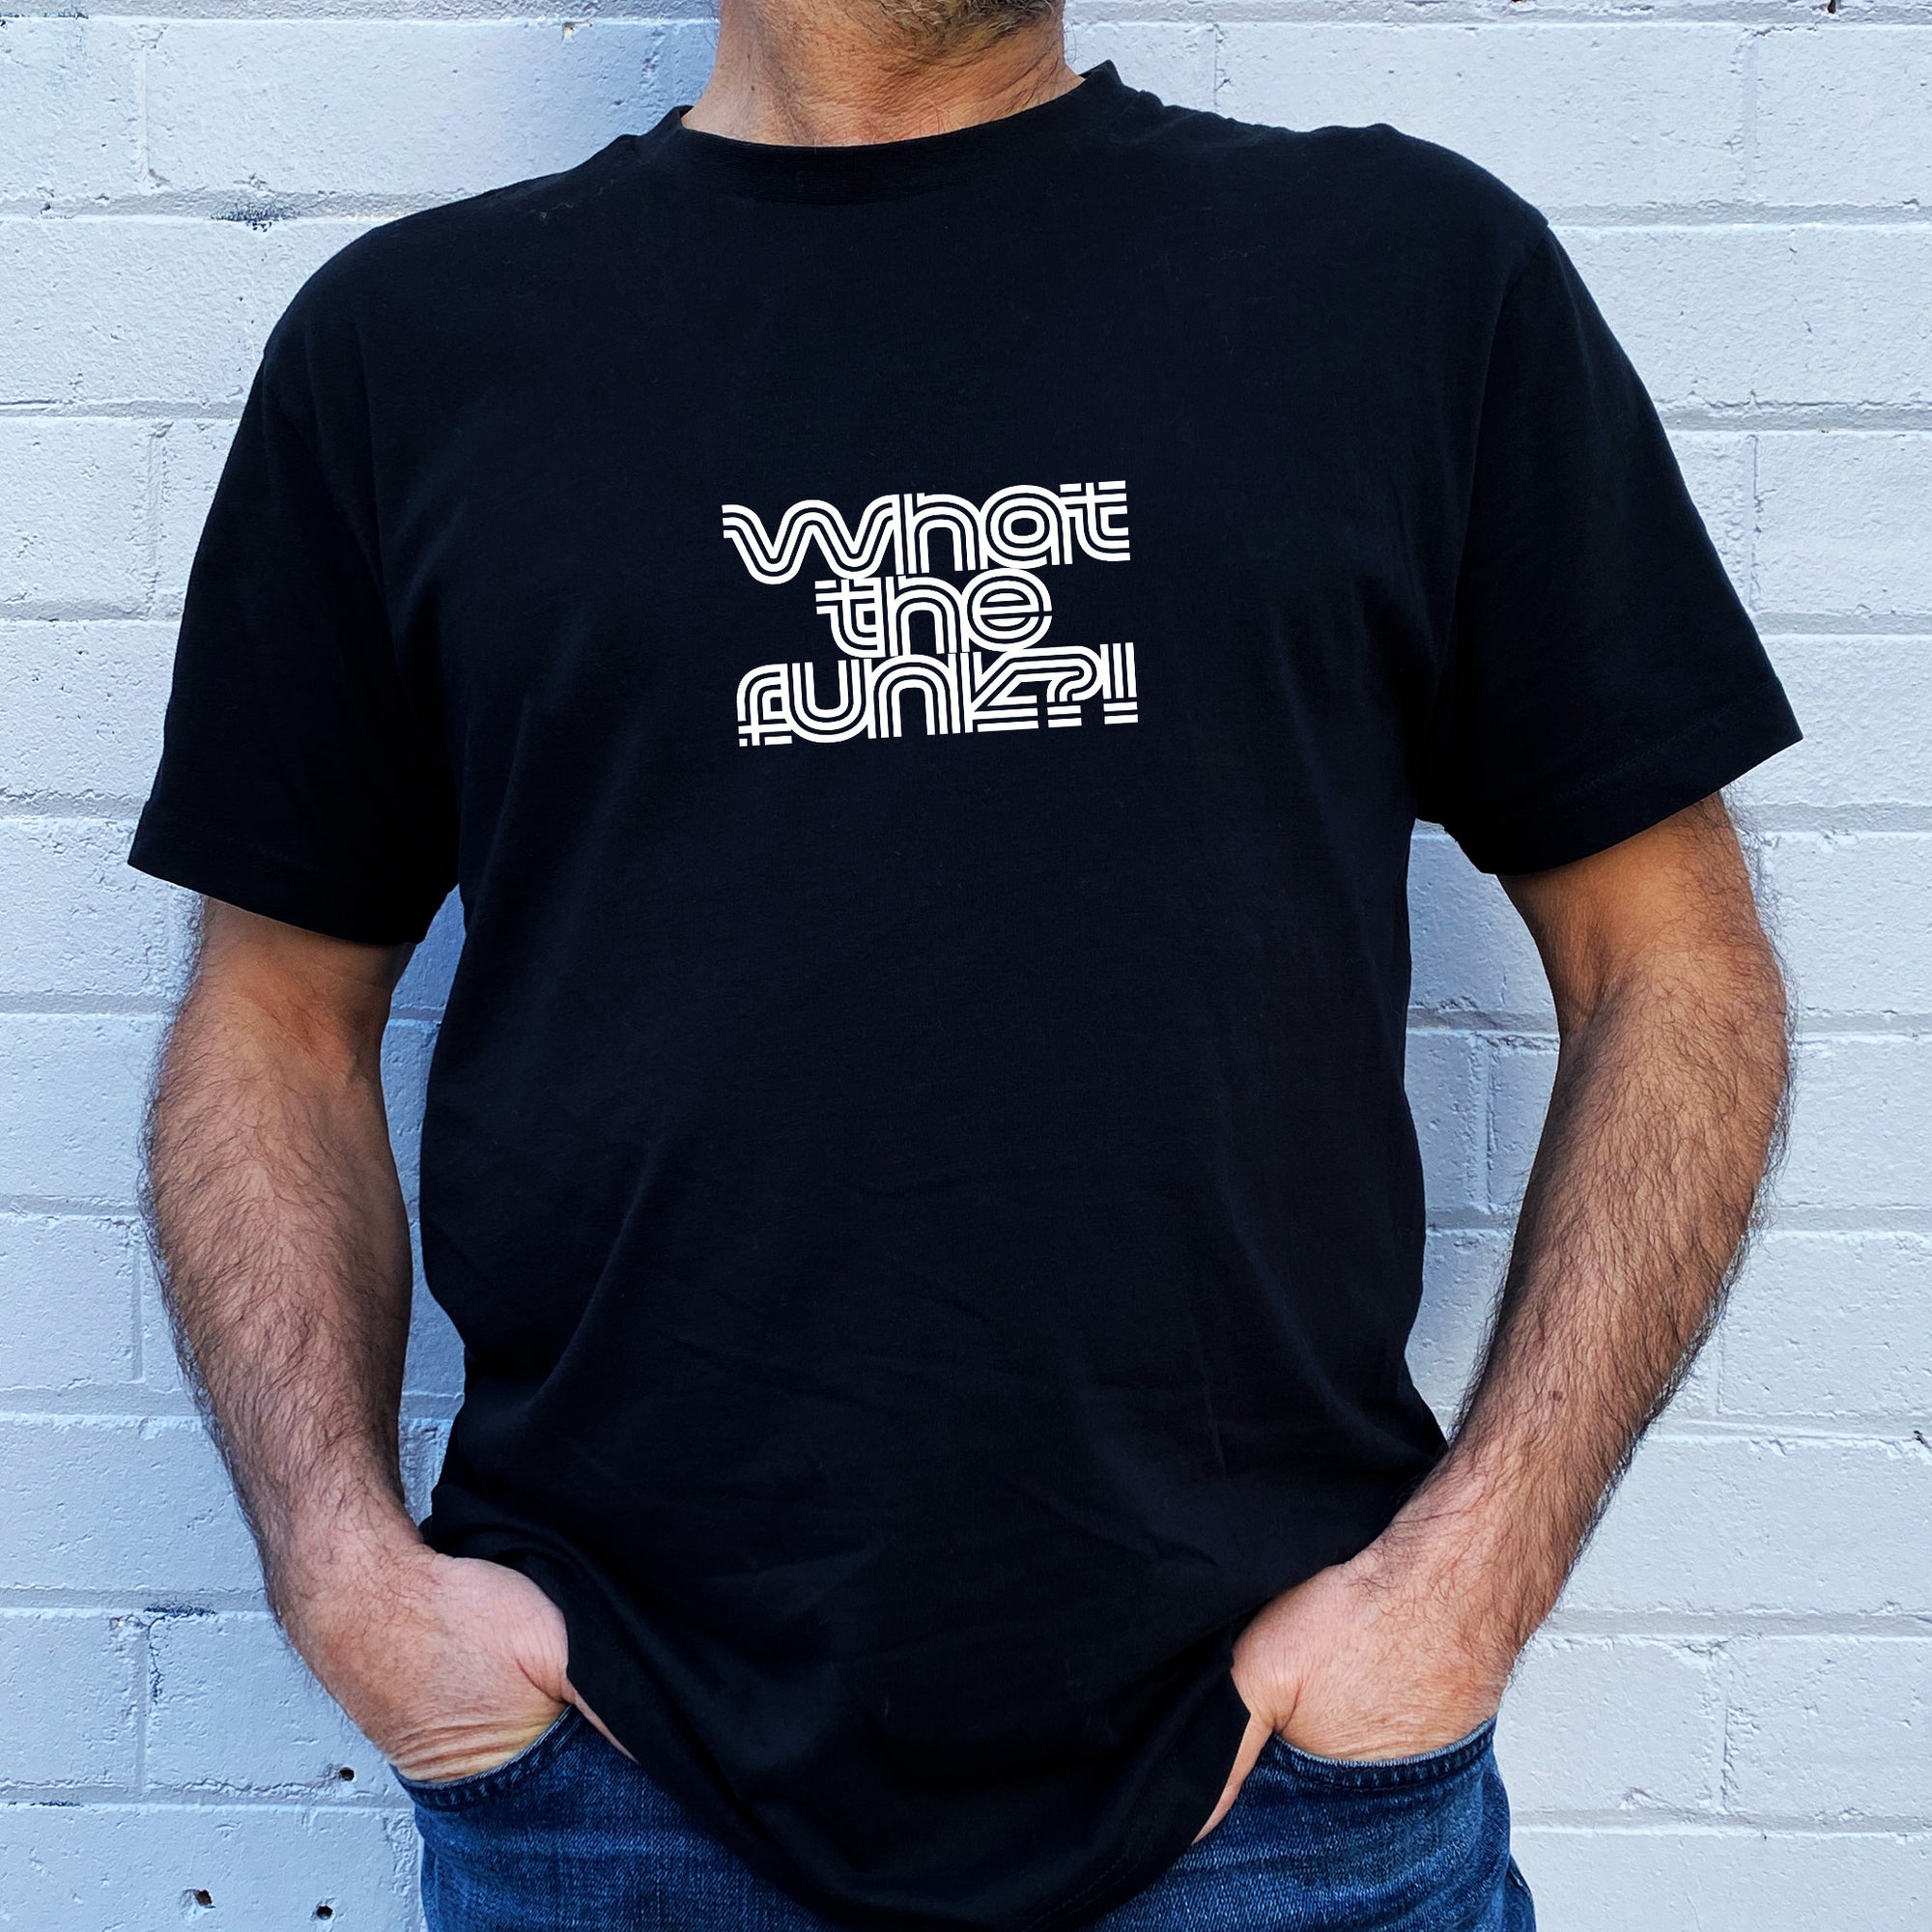 I'm With The Band® What The Funk? T-shirt with white print on black T being worn by a faceless man standing against a white painted brick wall